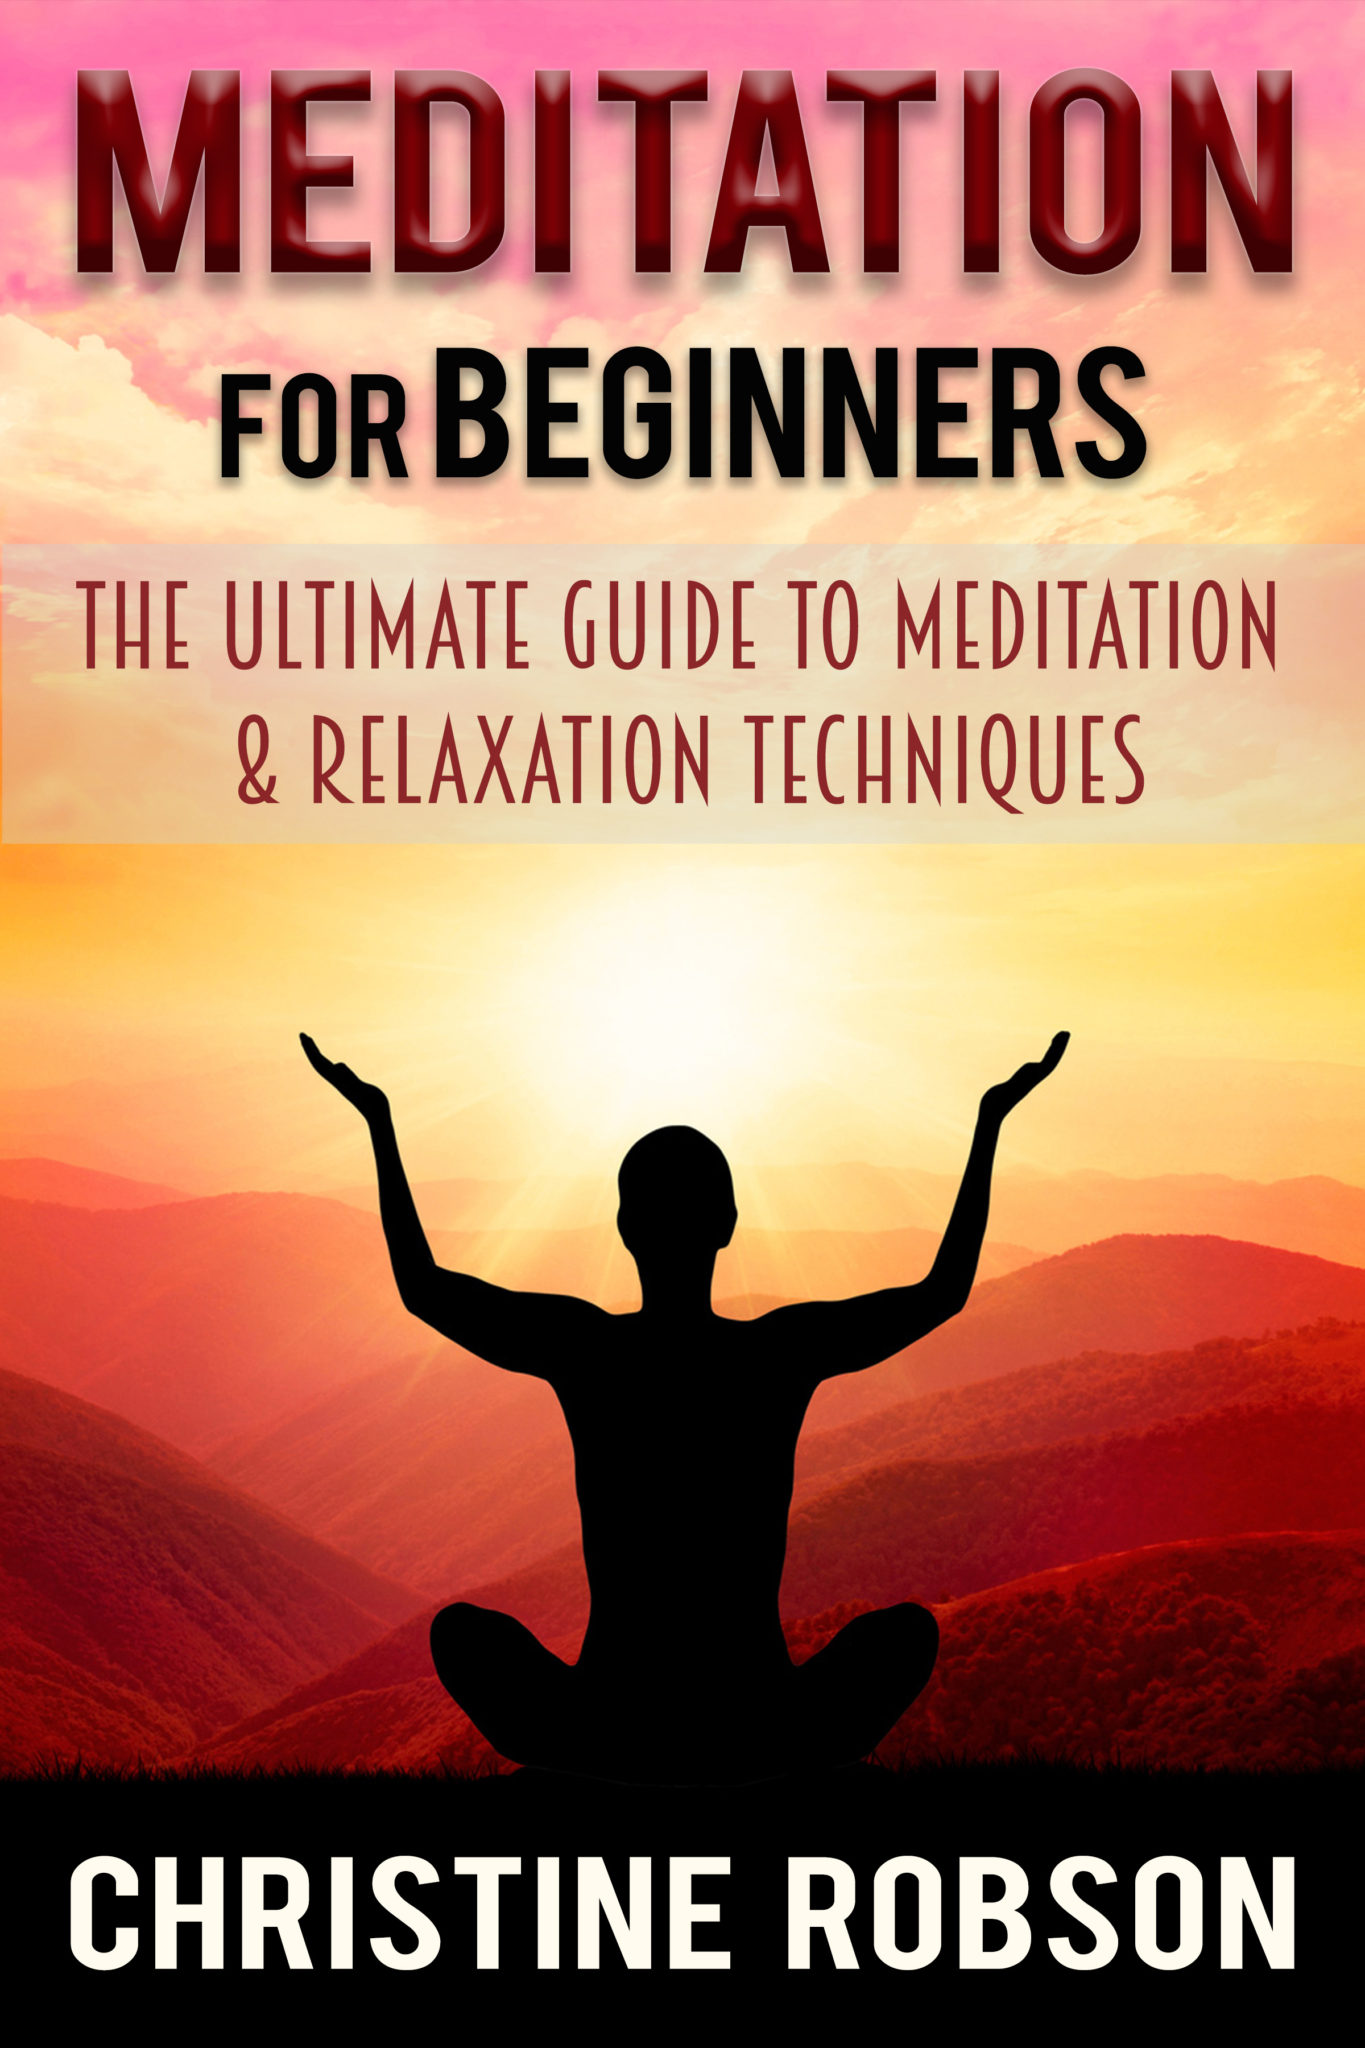 FREE: Meditation for Beginners by Christine Robson